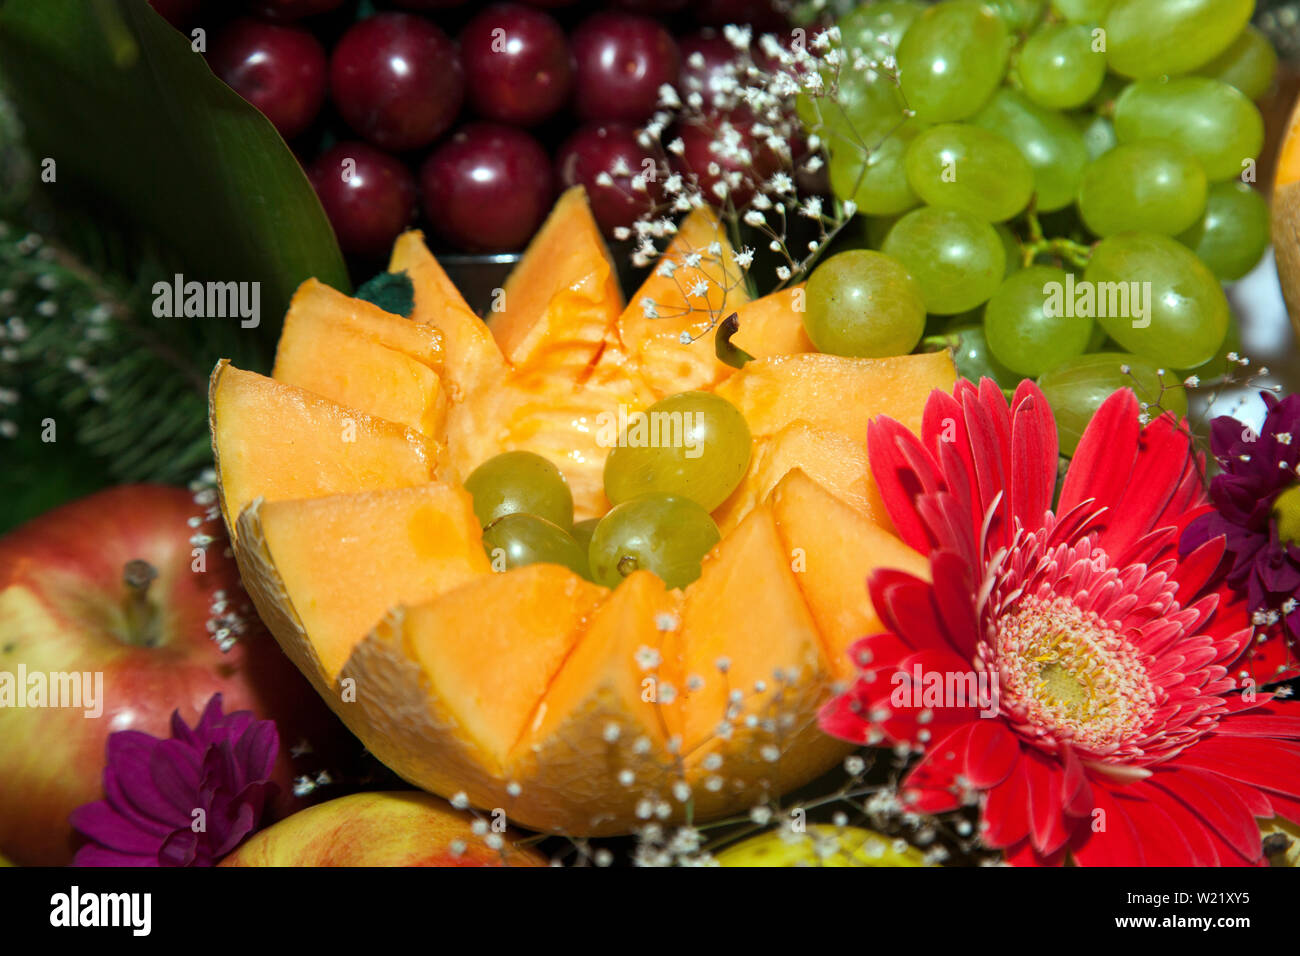 Decorated food on a festive table Stock Photo